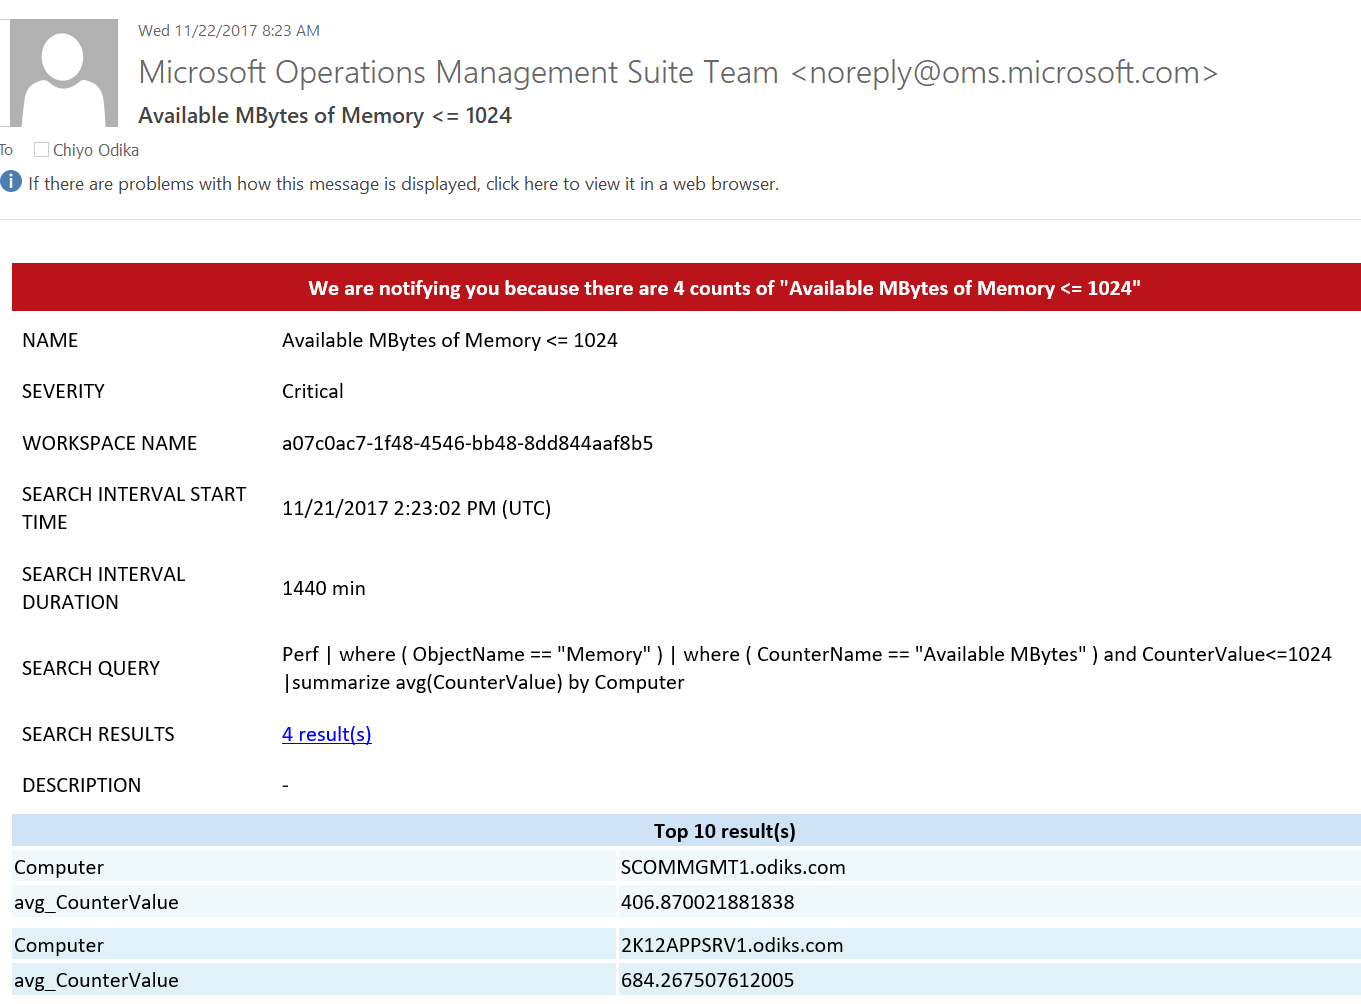 Microsoft Operations Management Suite: An Overview - MrChiyo.com